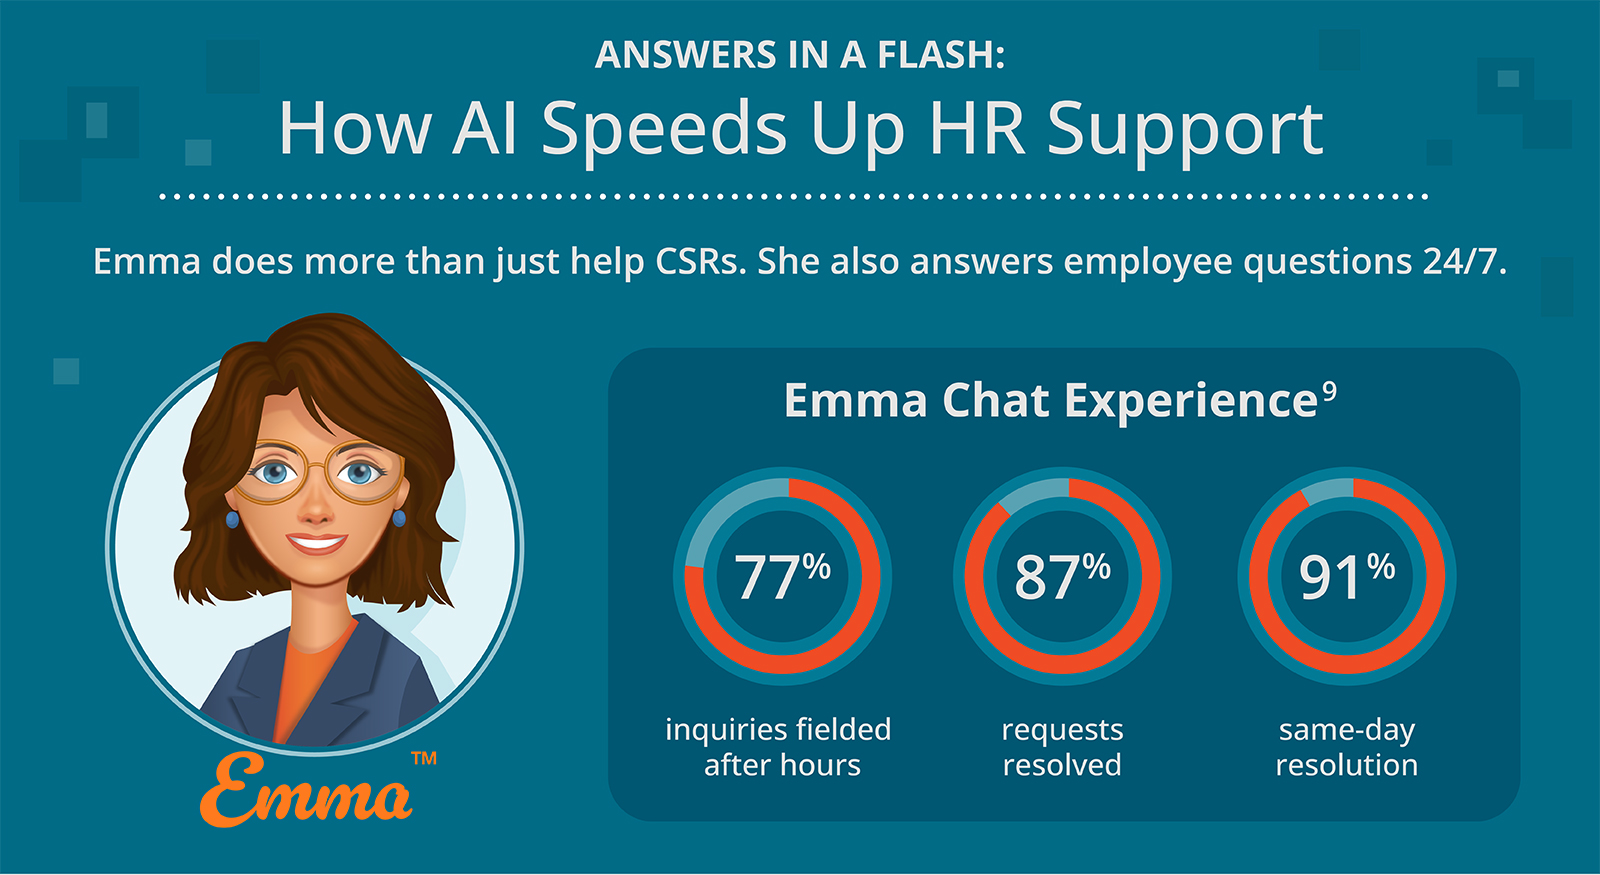 Answers in a Flash: How AI Speeds Up HR Support Emma does more than just help CSRs. She also answers employee questions 24/7. 77% inquiries fielded after hours 87% of requests resolved 91% same-day resolution mma Chat Experience10 